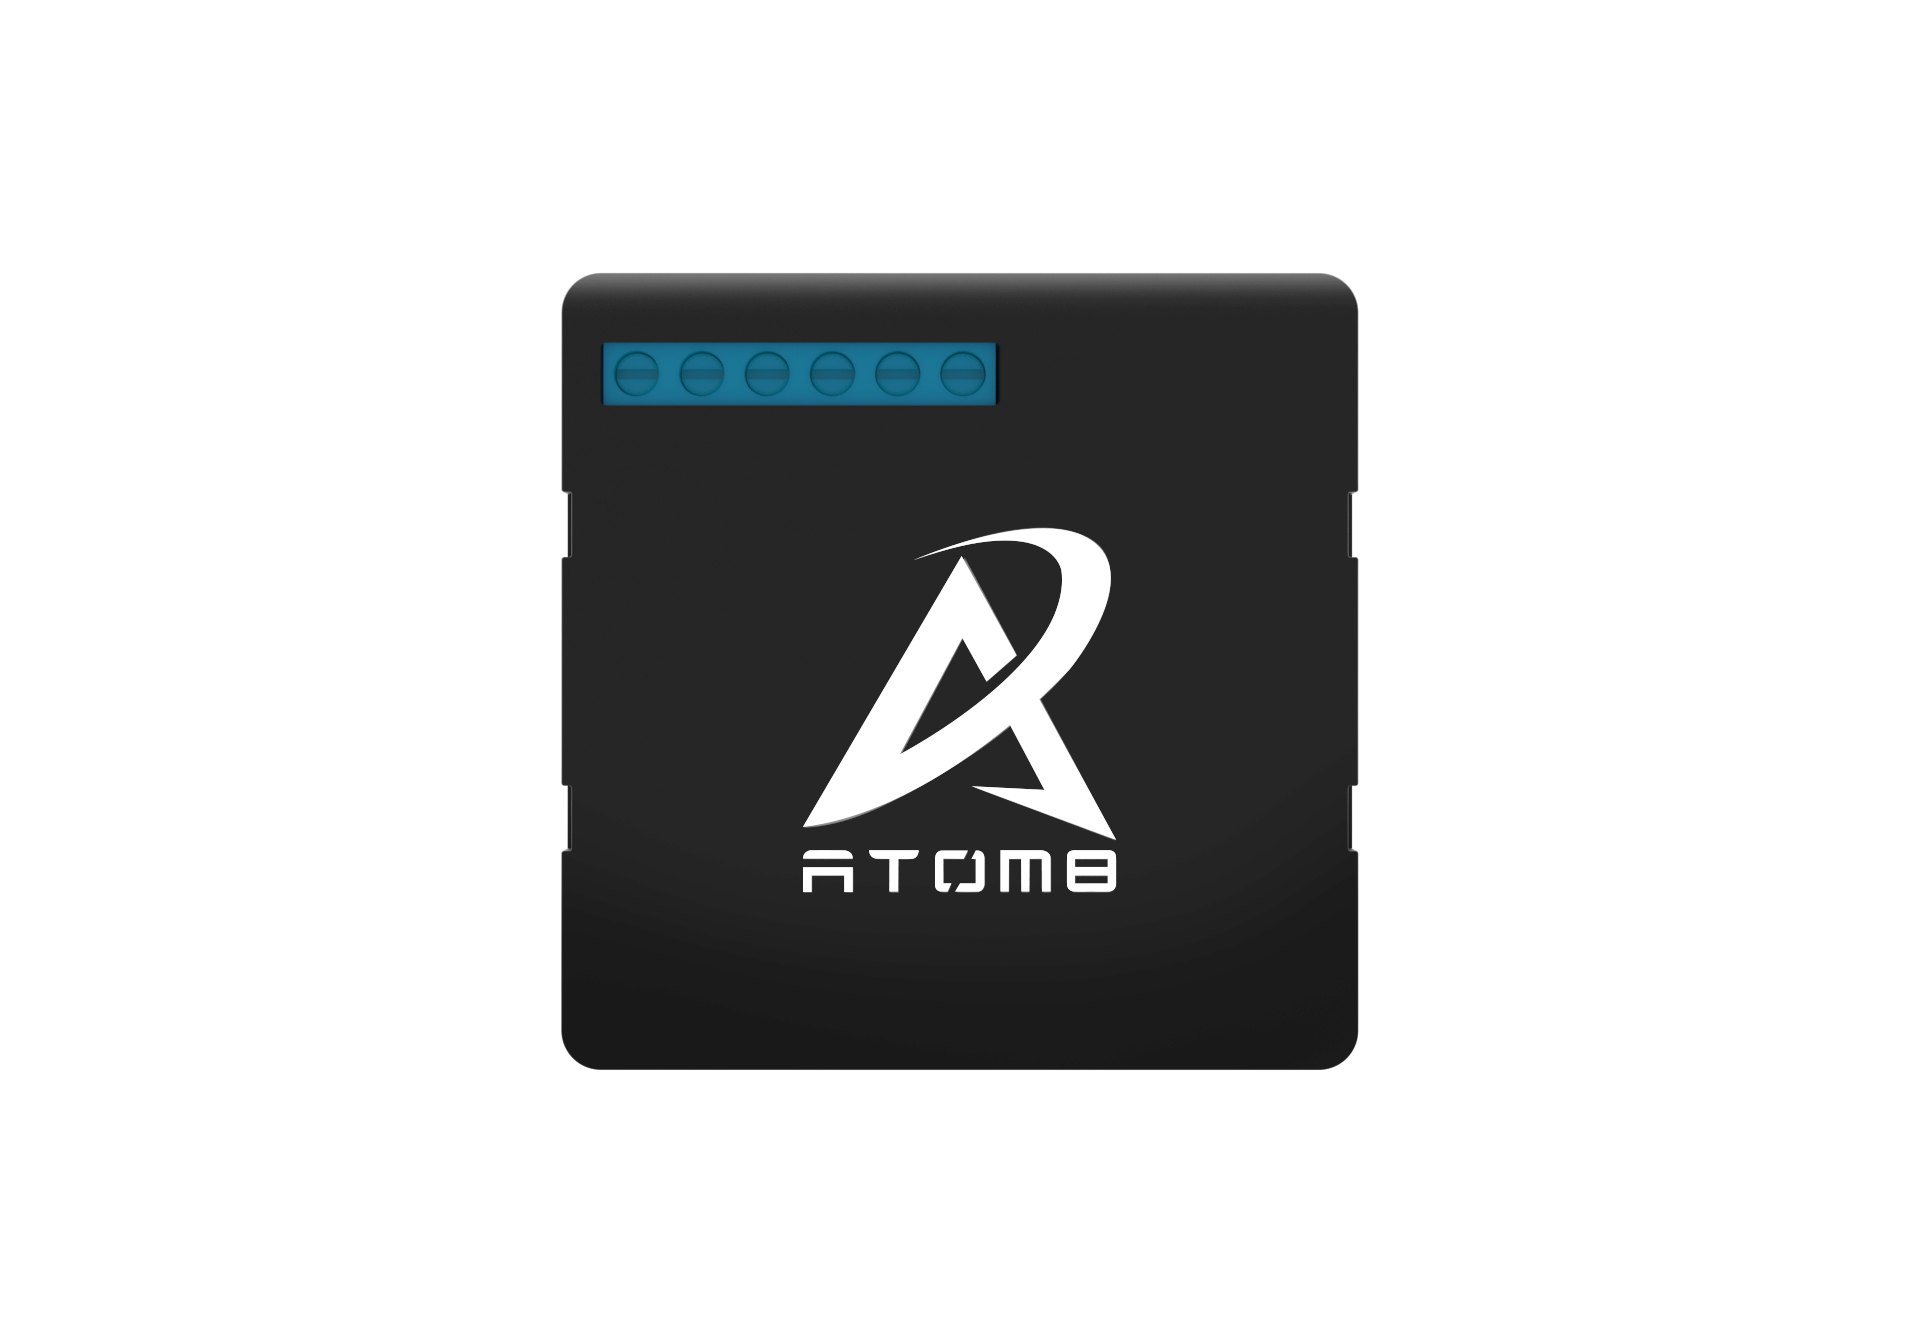 Atom8 Duo - 2 Node Retrofit Wifi Smart Switch compatible with alexa and google home